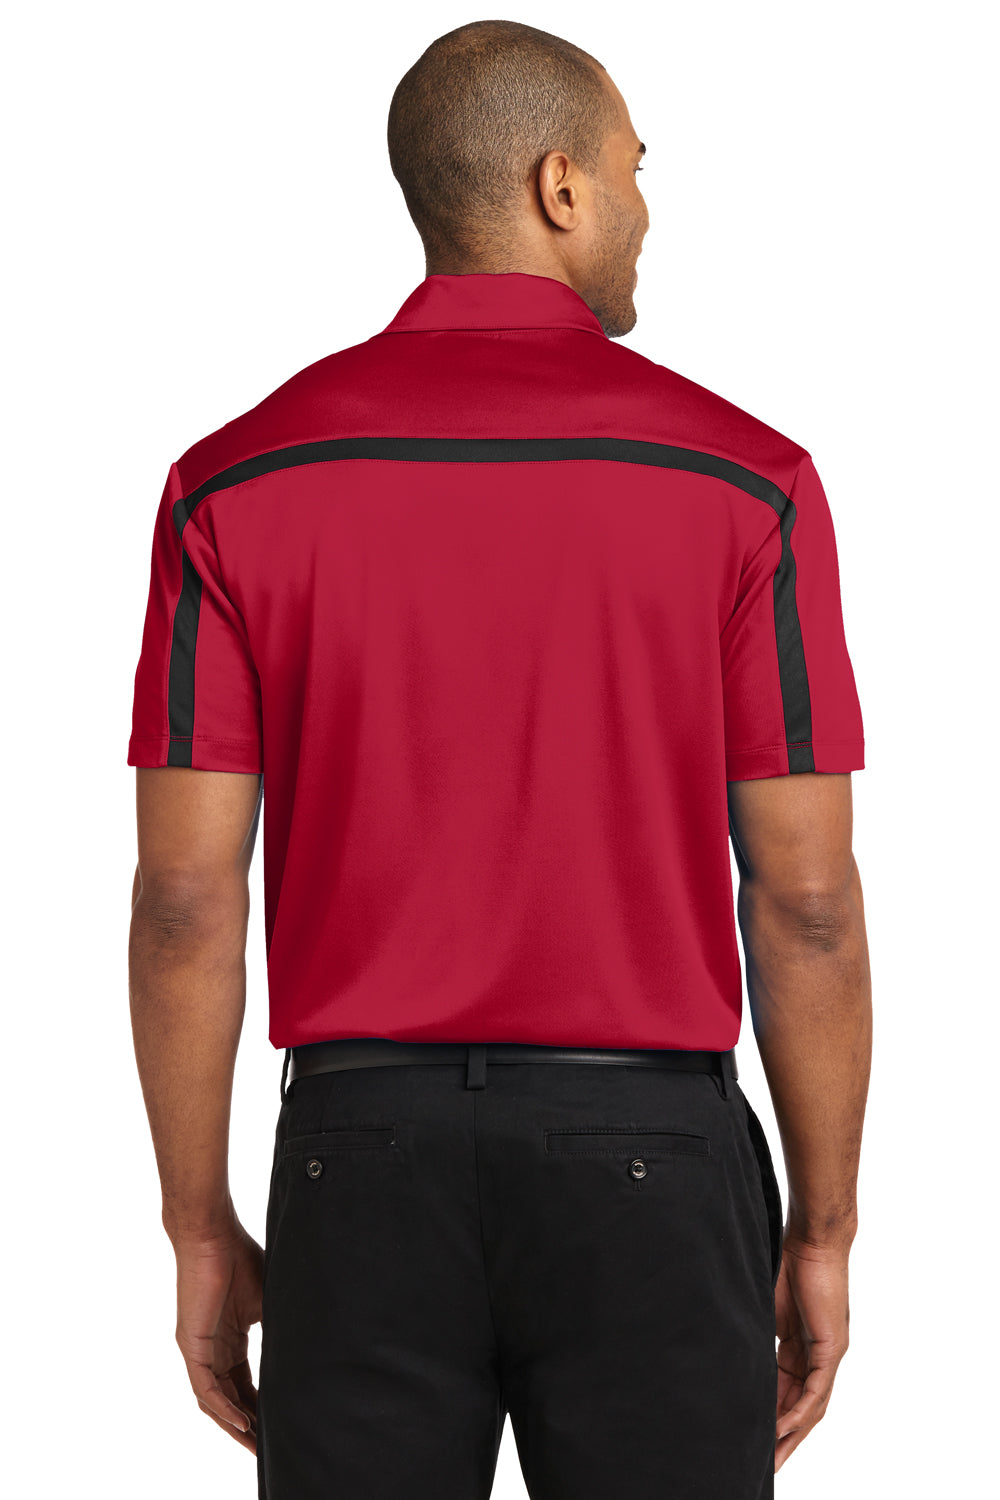 Port Authority K547 Mens Silk Touch Performance Moisture Wicking Short Sleeve Polo Shirt Red/Black Back